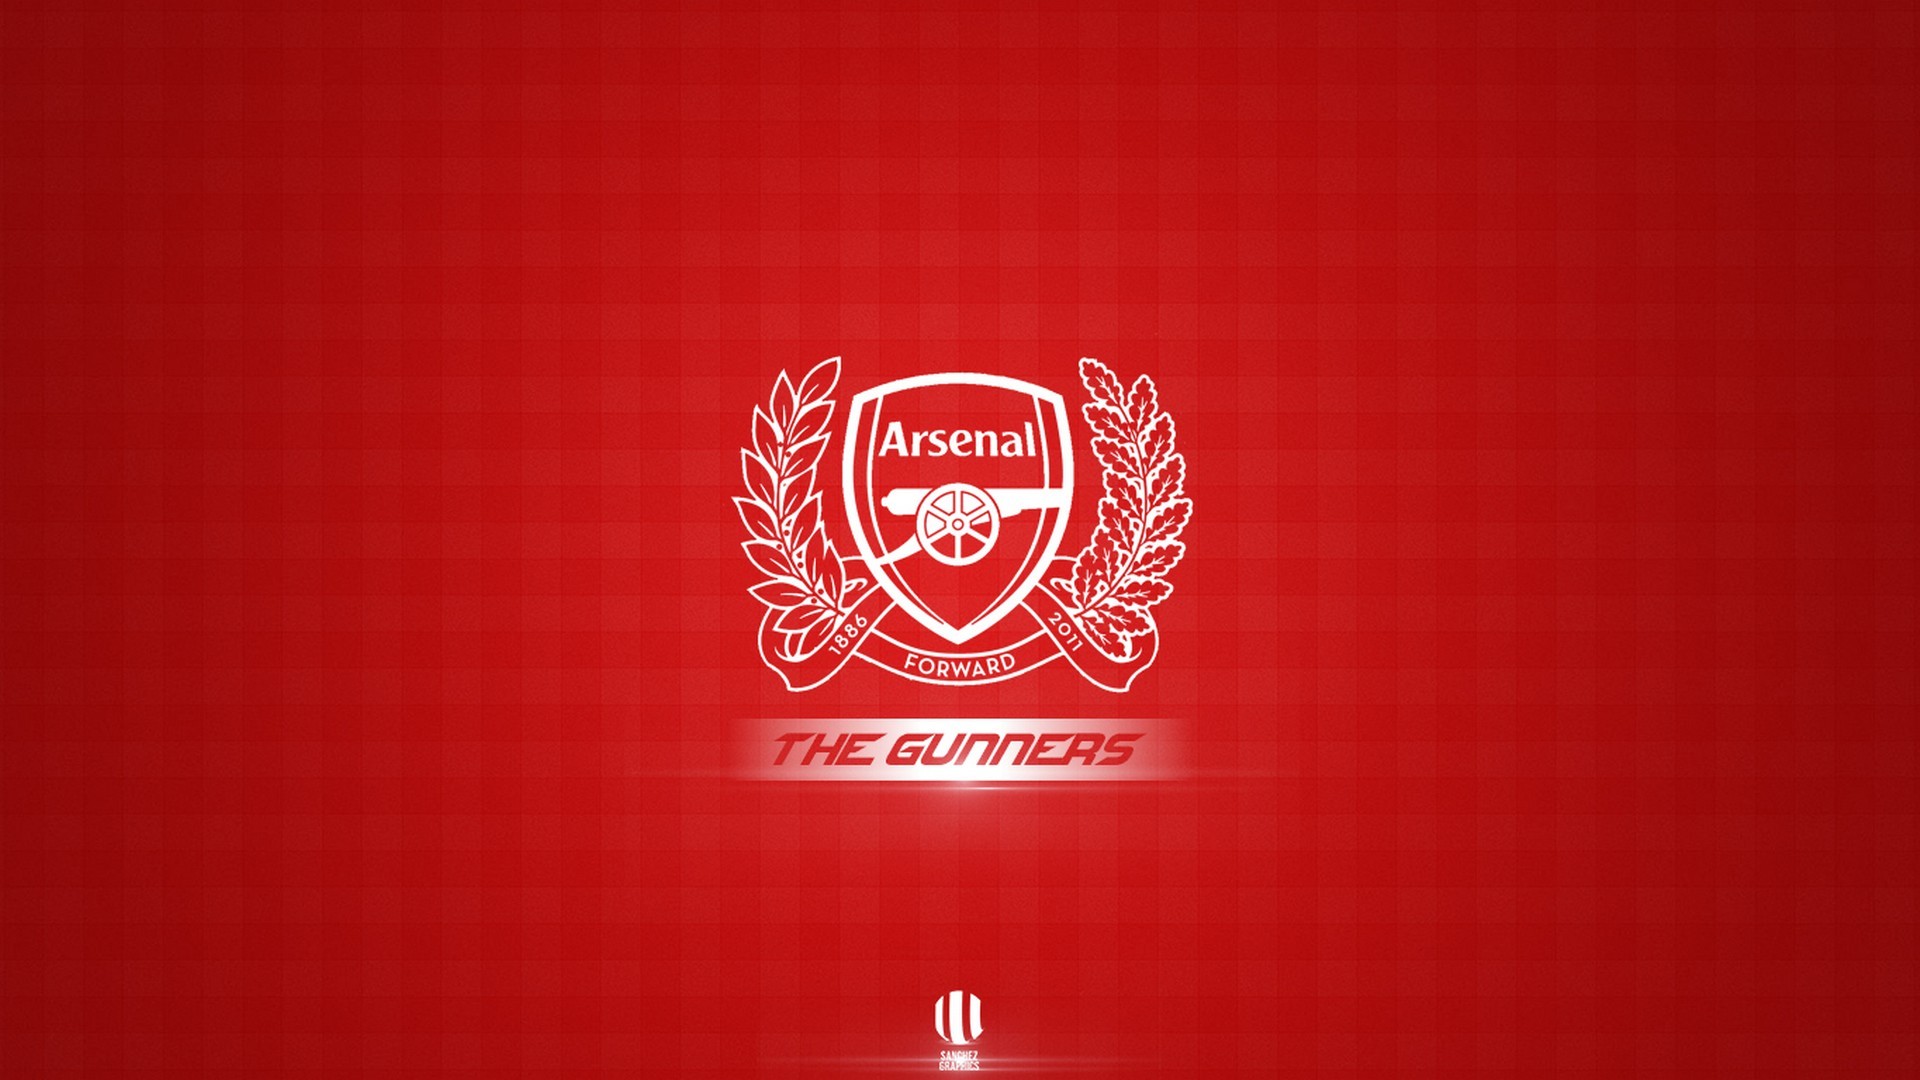 HD Arsenal Backgrounds With Resolution 1920X1080 pixel. You can make this wallpaper for your Mac or Windows Desktop Background, iPhone, Android or Tablet and another Smartphone device for free